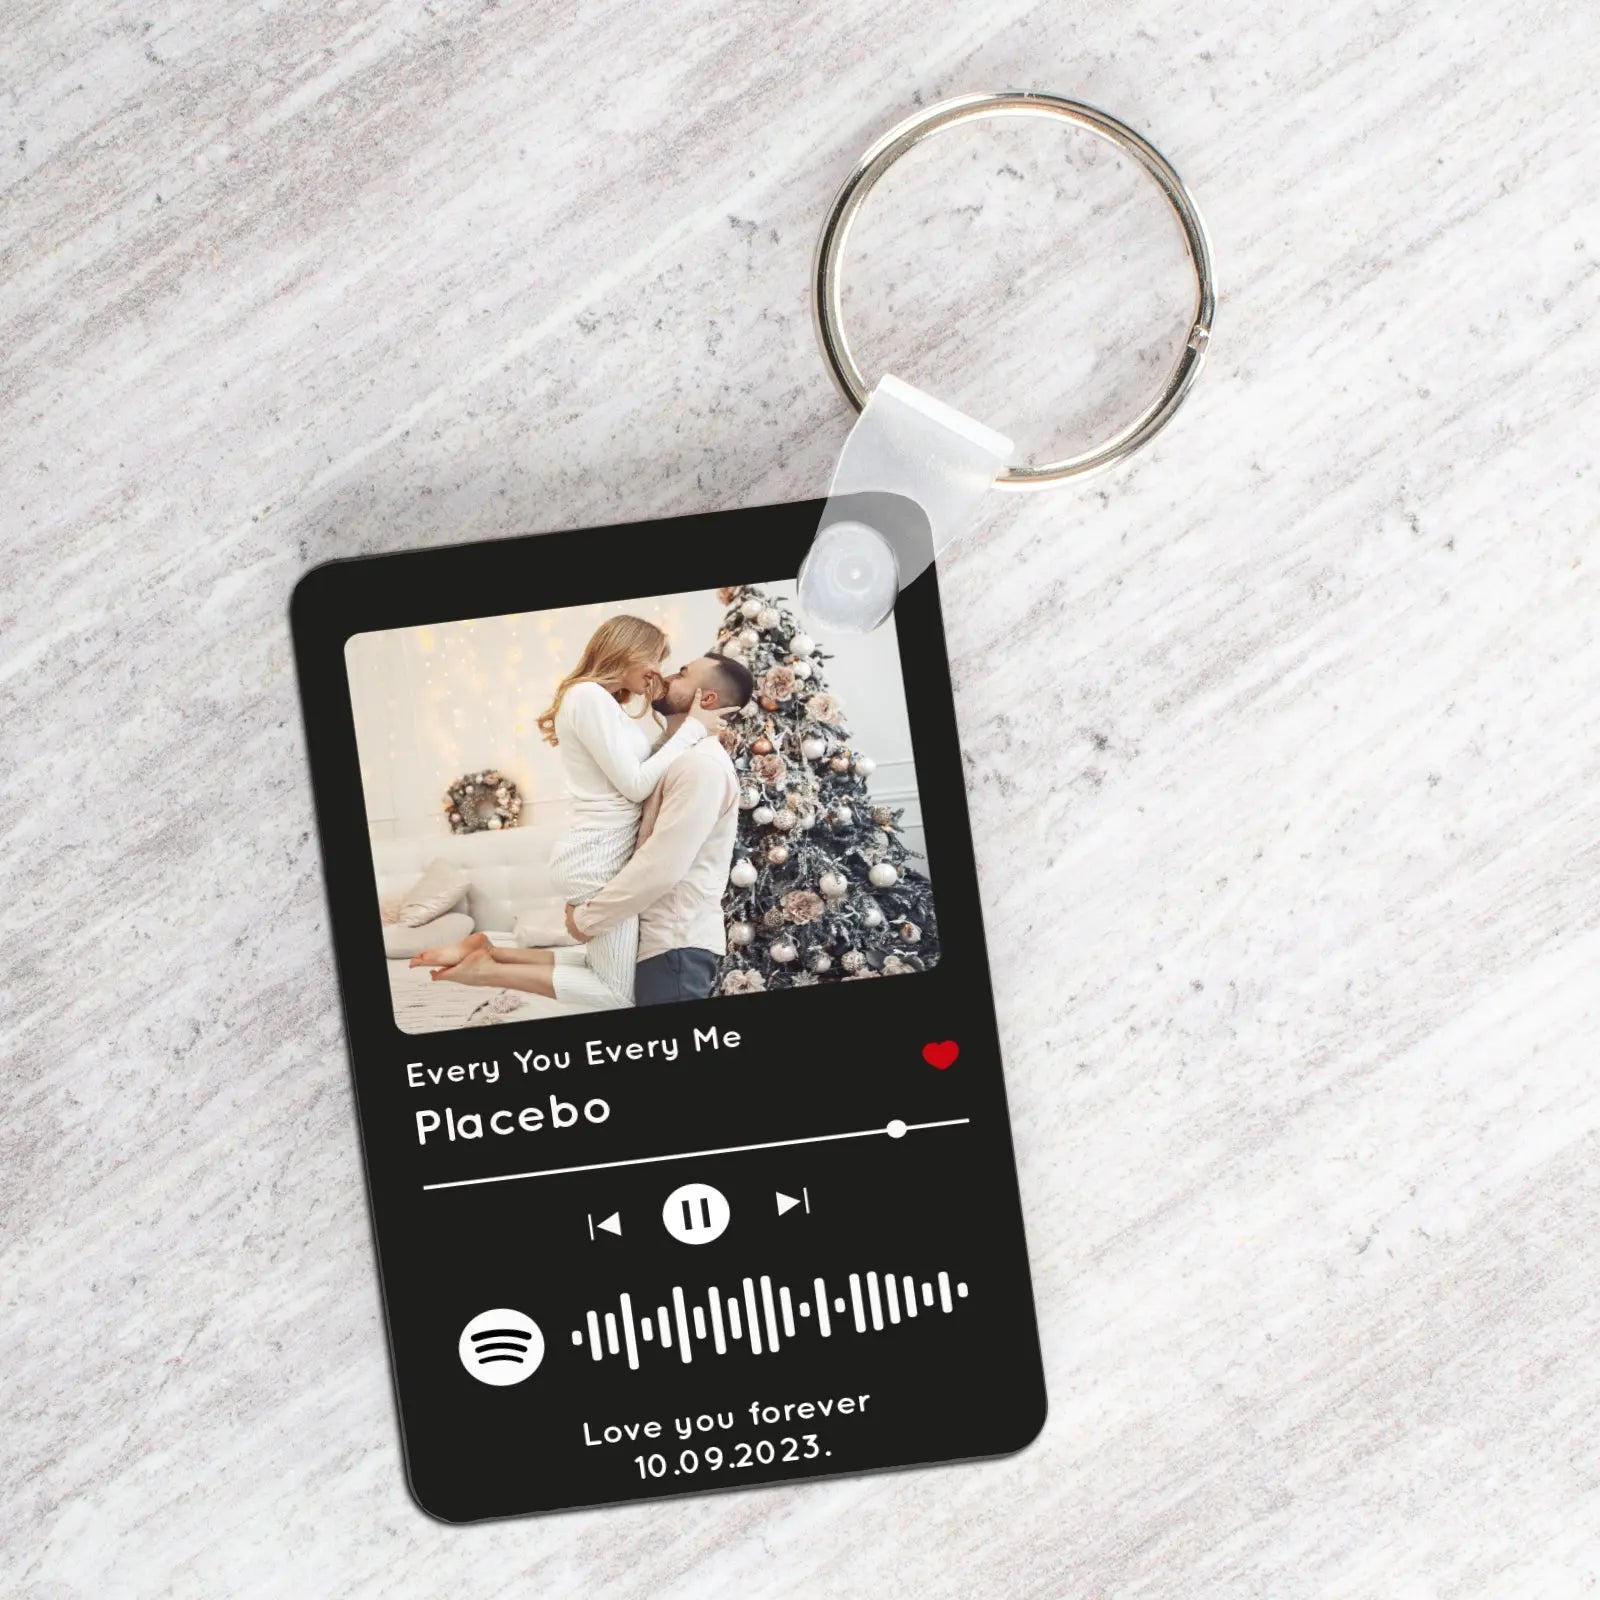 Personalised Spotify Code Keychain Plaque, Custom Engraved Acrylic Song Album Cover with Photo, Customized Music Picture Keyring 70X50mm - CushionPop